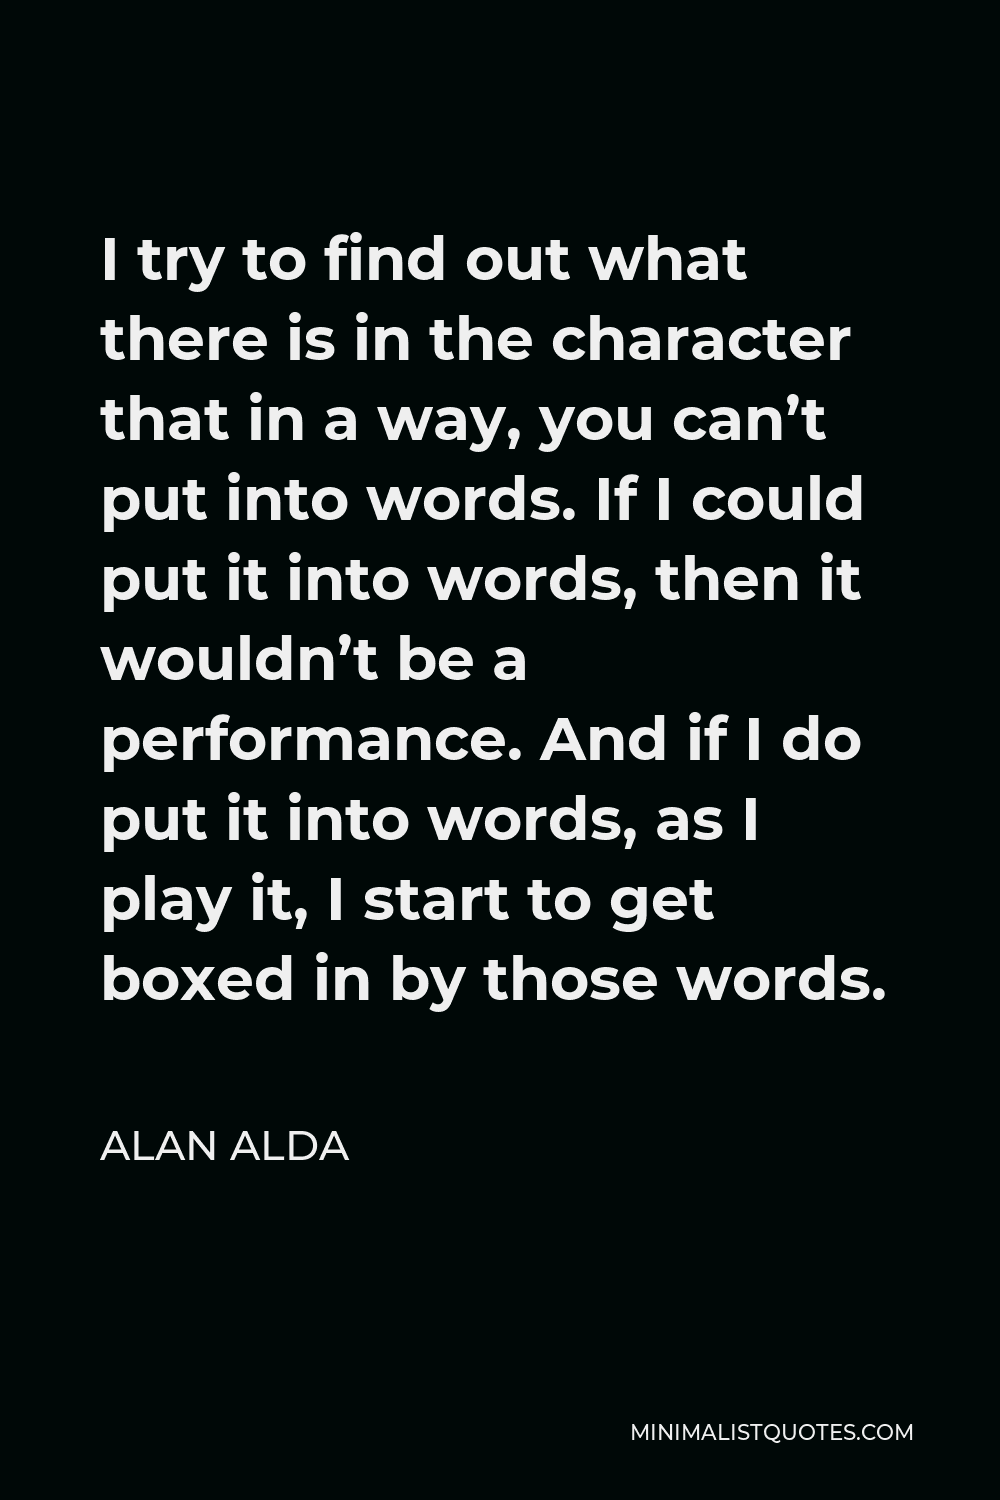 Alan Alda Quote - I try to find out what there is in the character that in a way, you can’t put into words. If I could put it into words, then it wouldn’t be a performance. And if I do put it into words, as I play it, I start to get boxed in by those words.